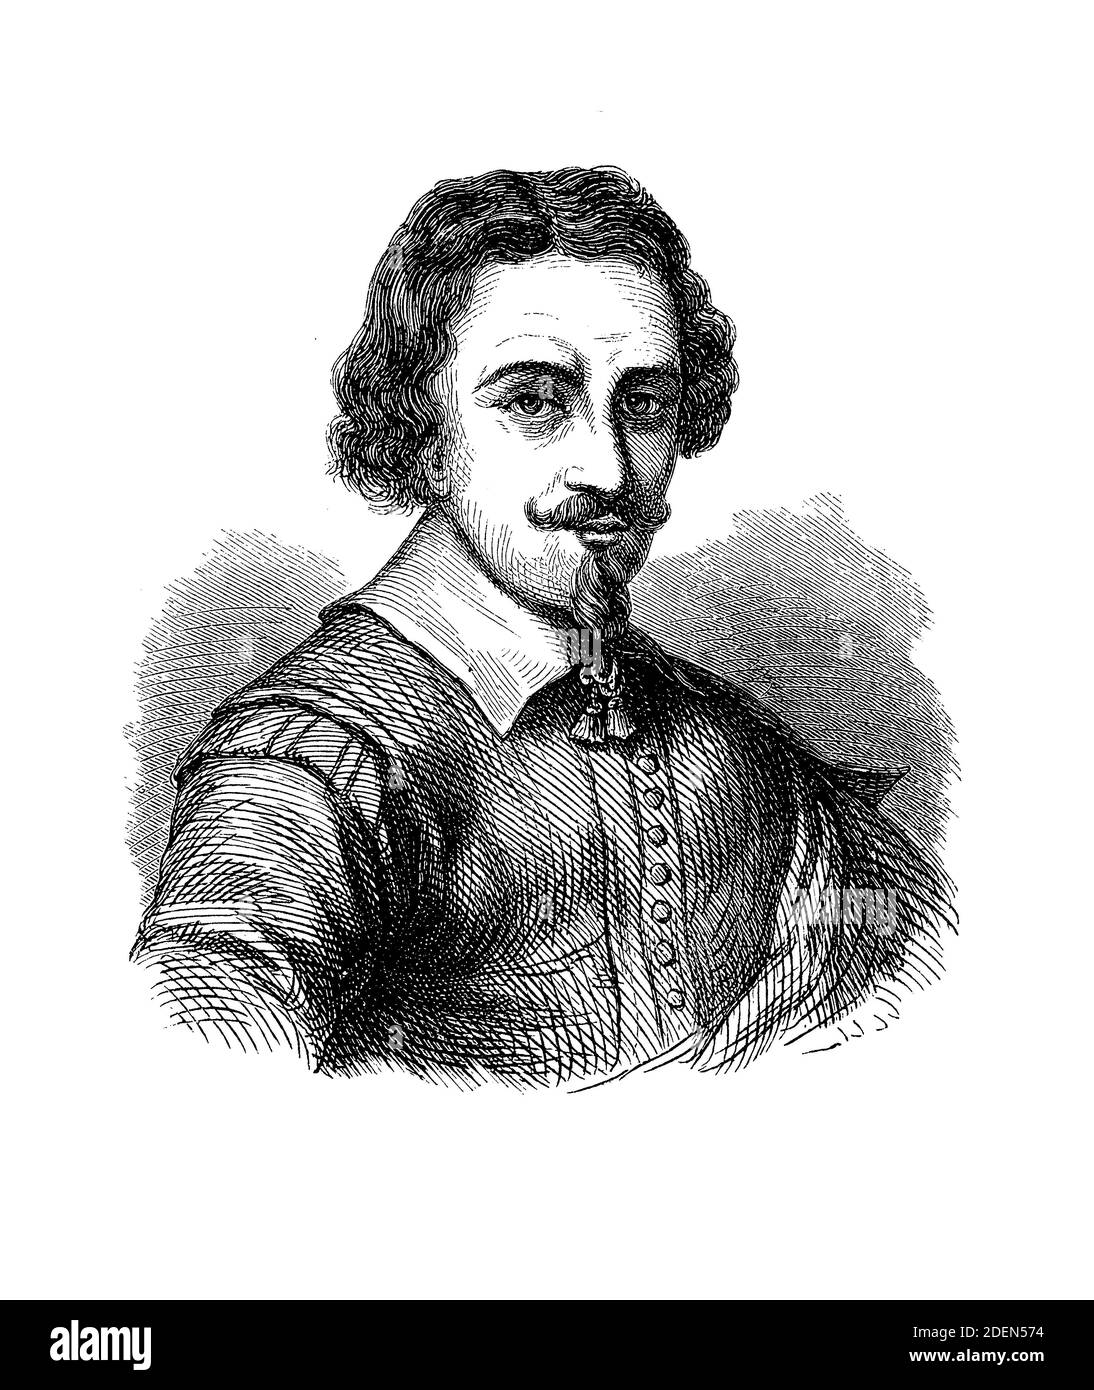 Zacharias Jansen (1585-1632) Dutch spectacle and optical devices maker, known for the first optical telescope and compound telescope invention Stock Photo